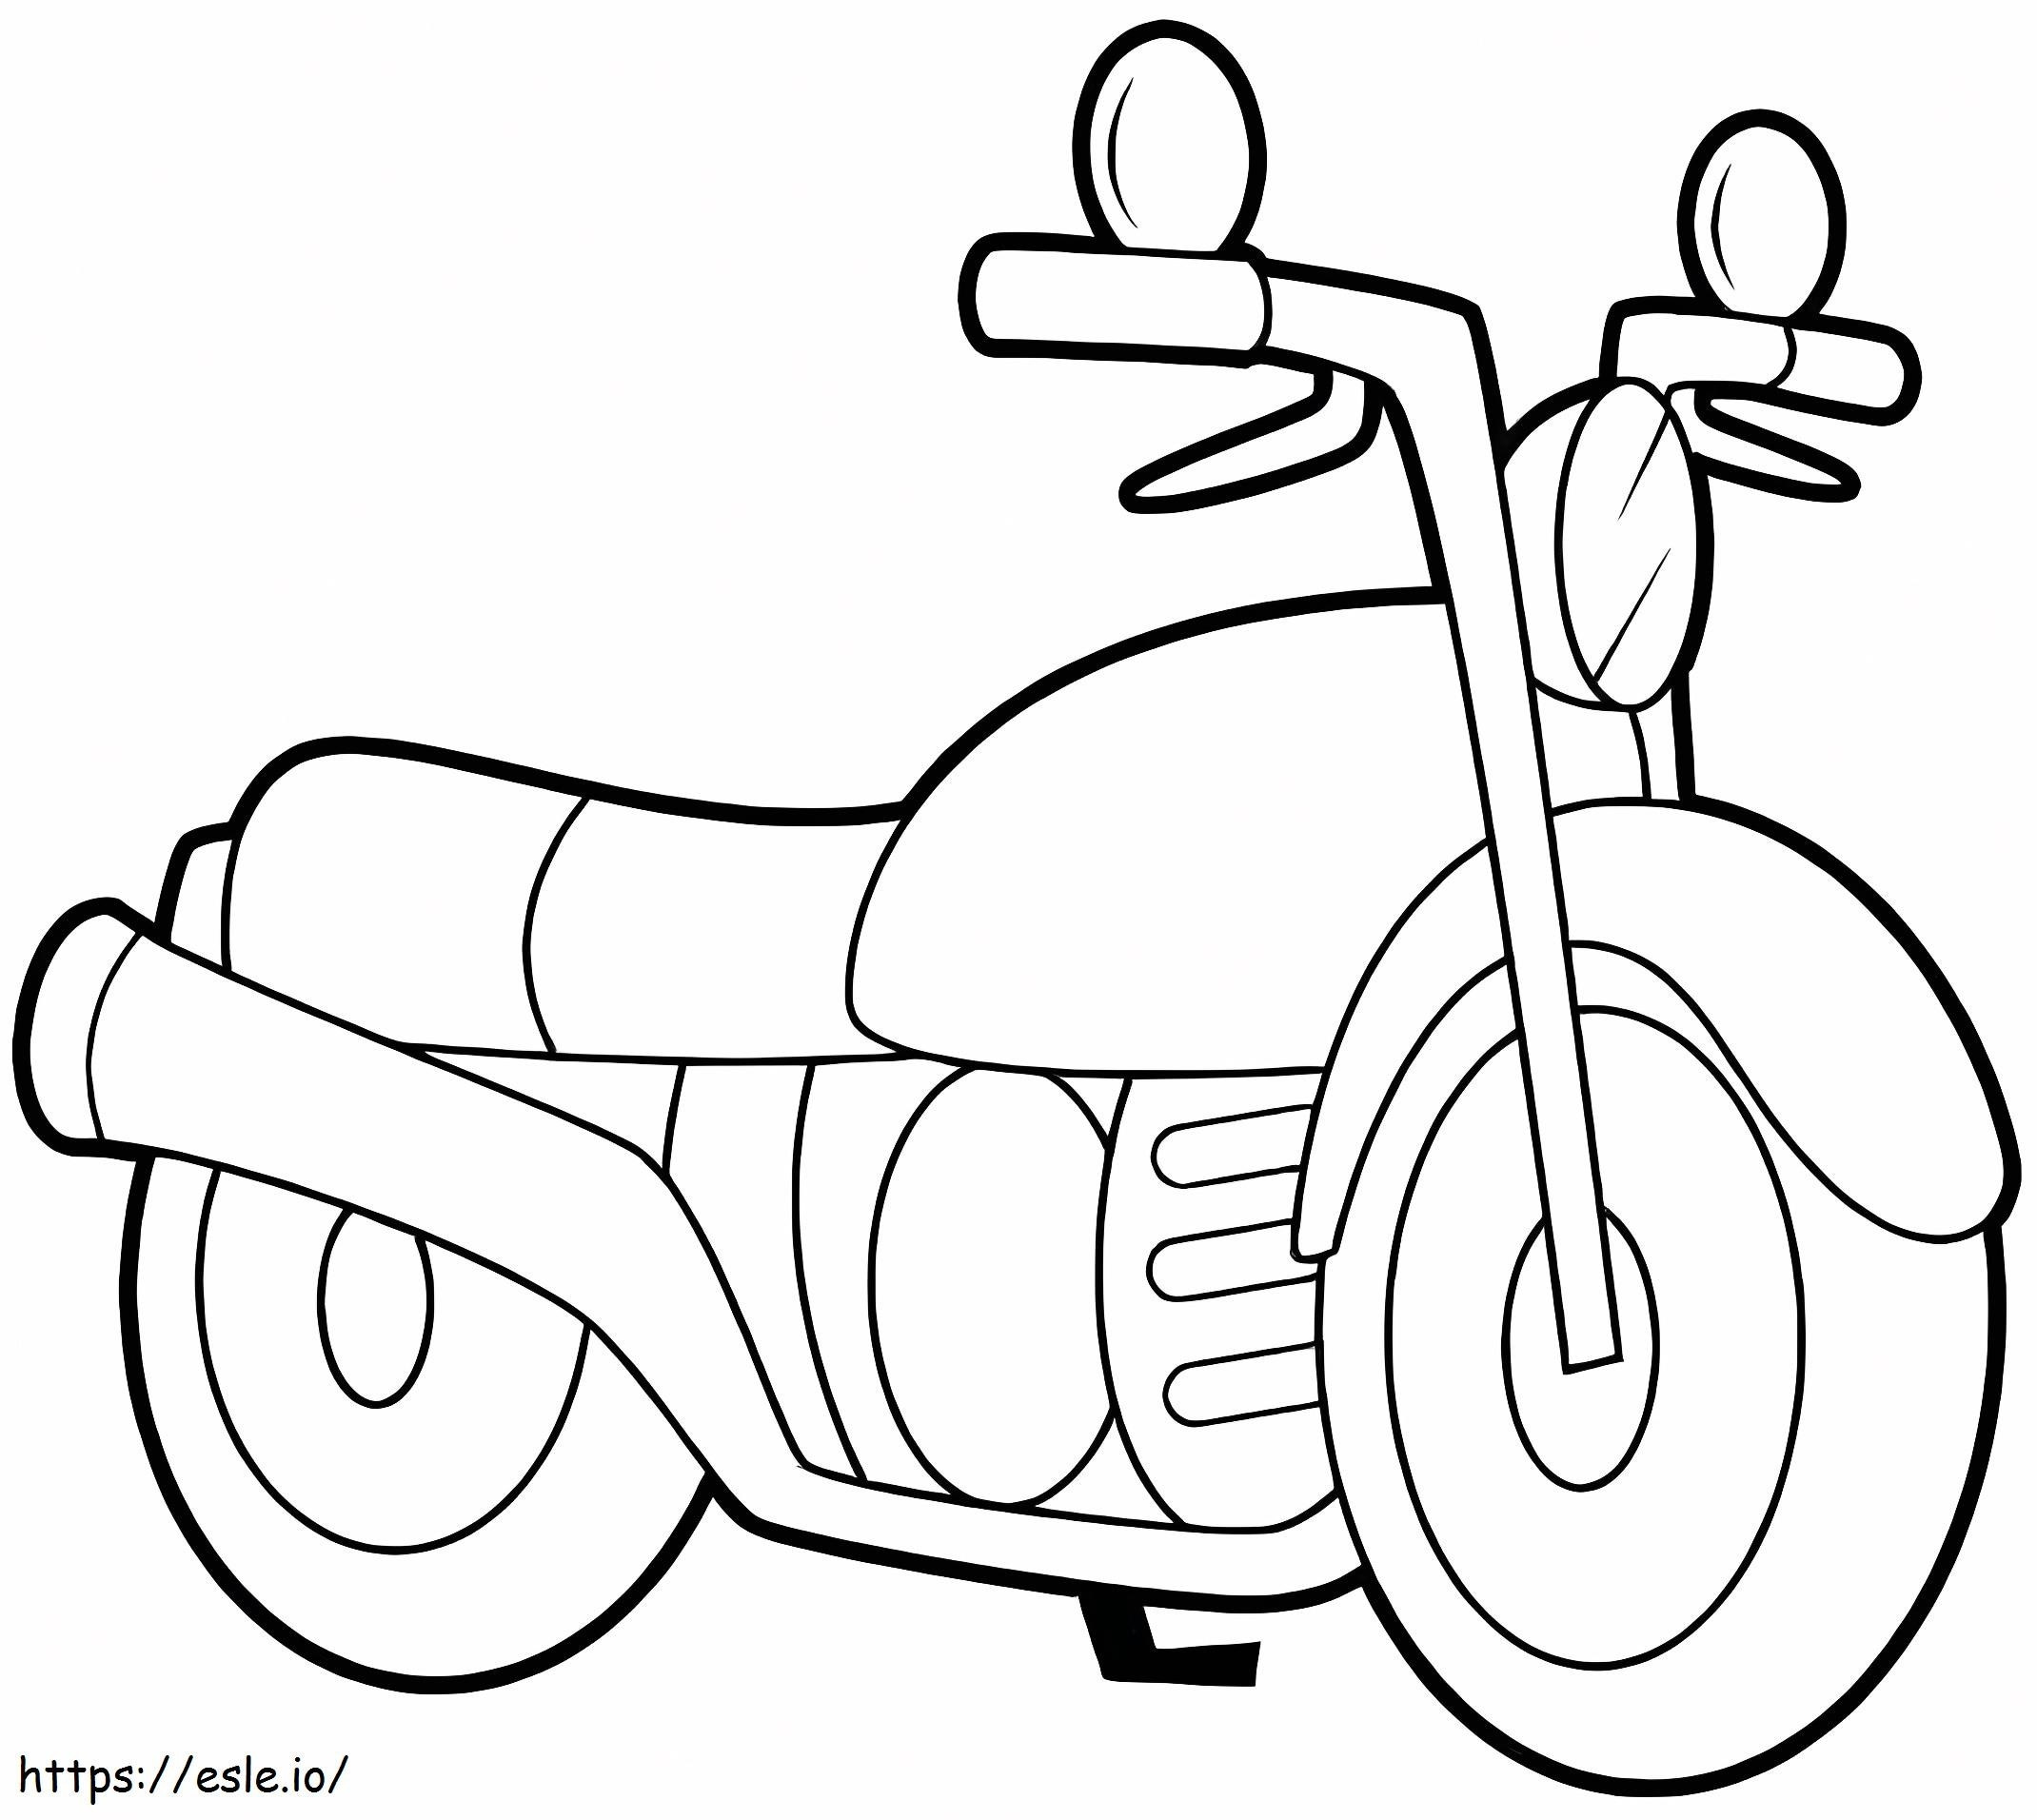 A Normal Motorcycle coloring page